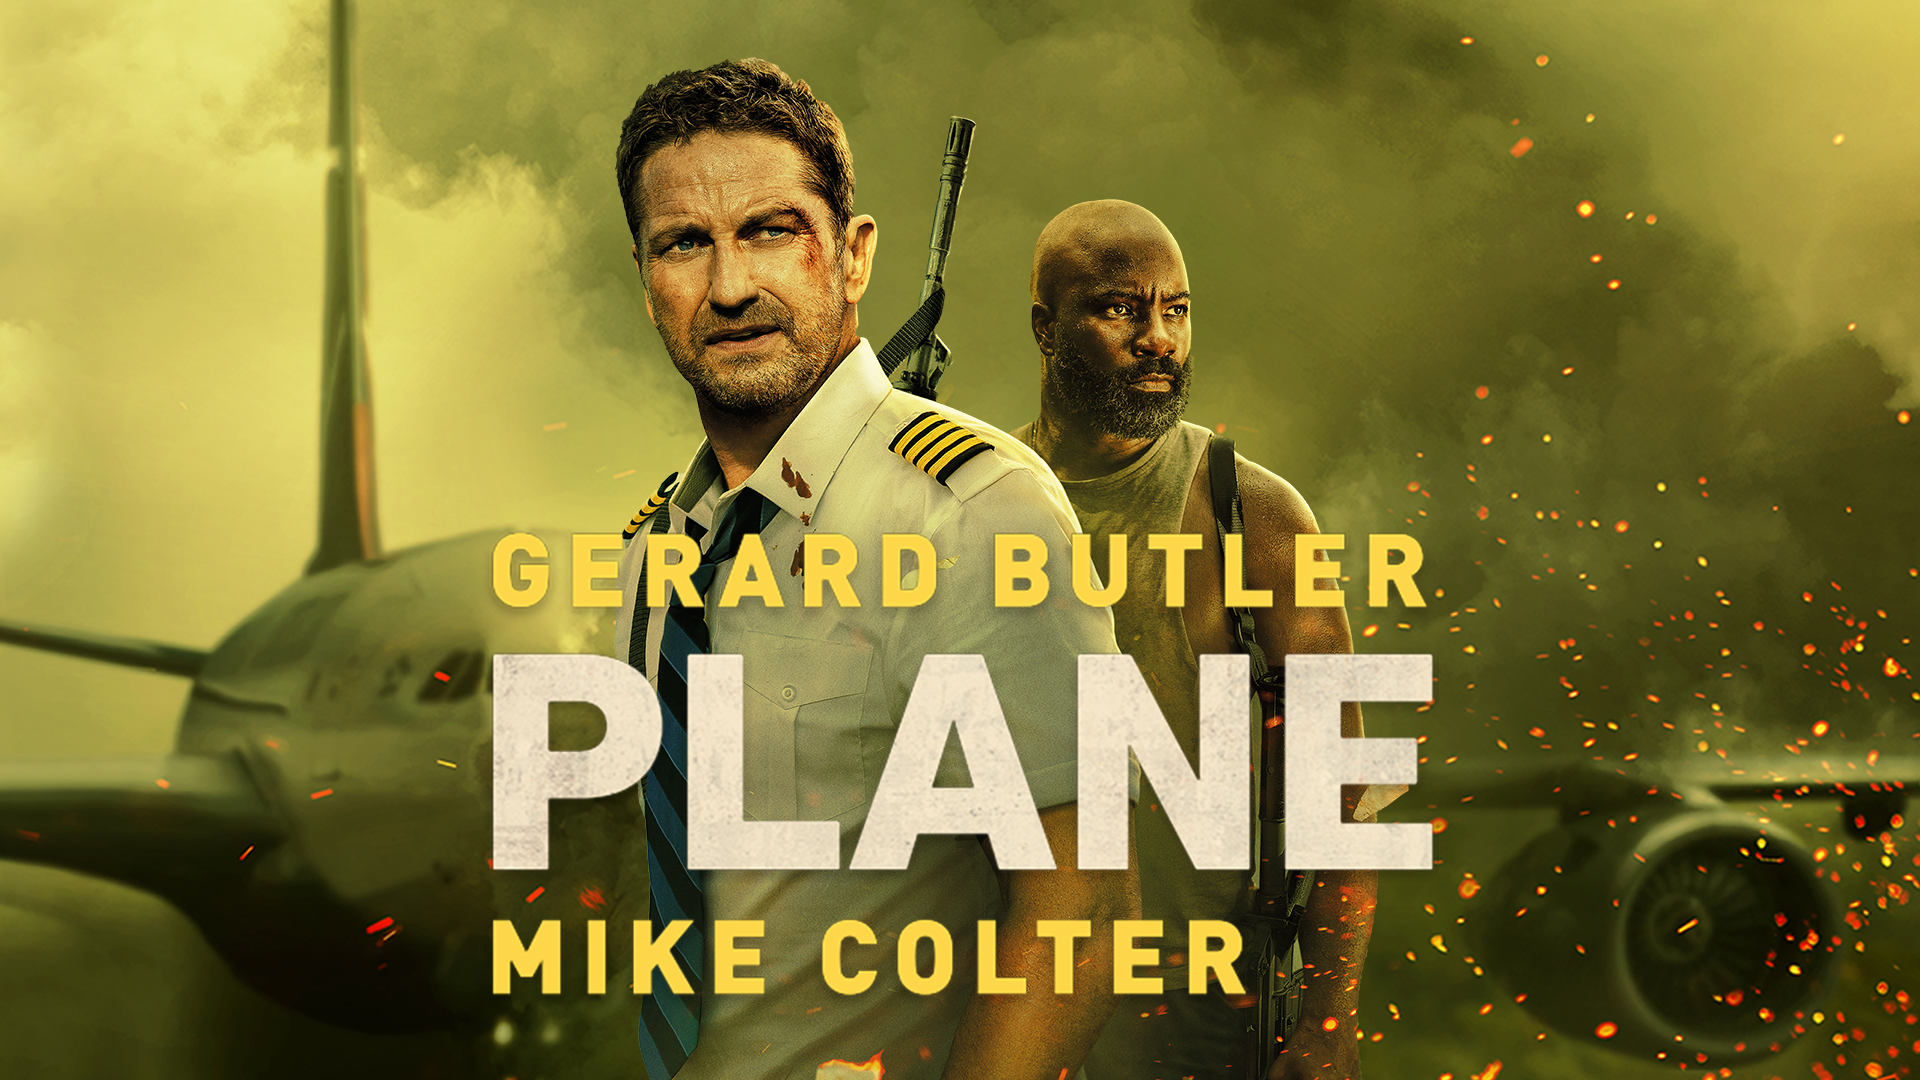 Plane (2023) Review: Gerard Butler’s Thrilling Rescue Mission Takes Off